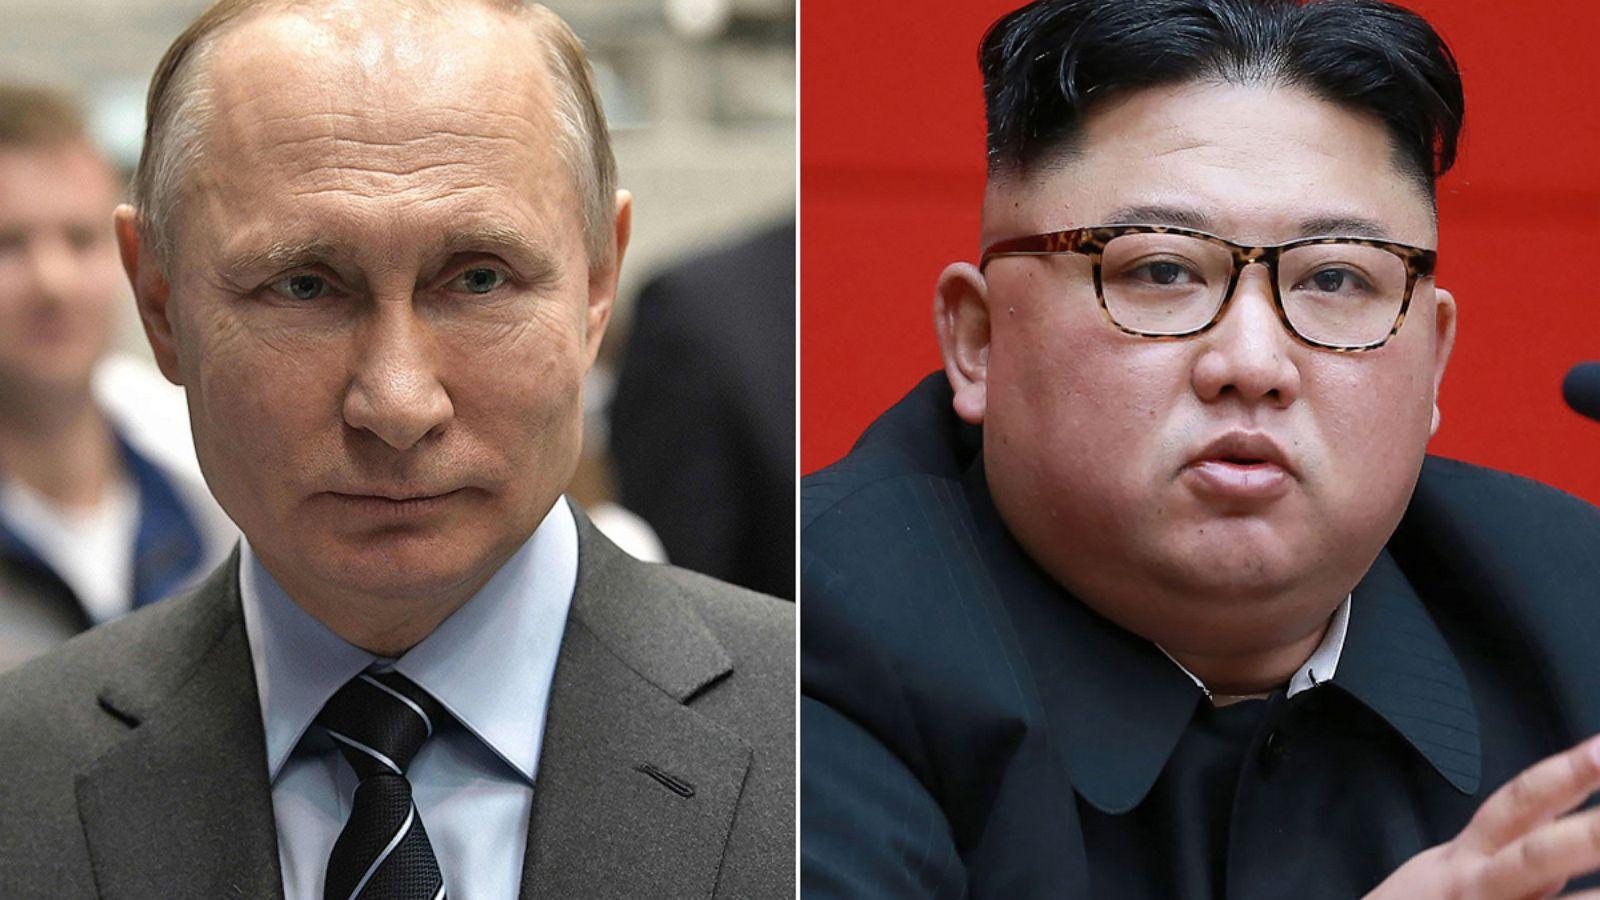 This decision of South Korea and America has worried Russia and North Korea, know what Putin will do now?